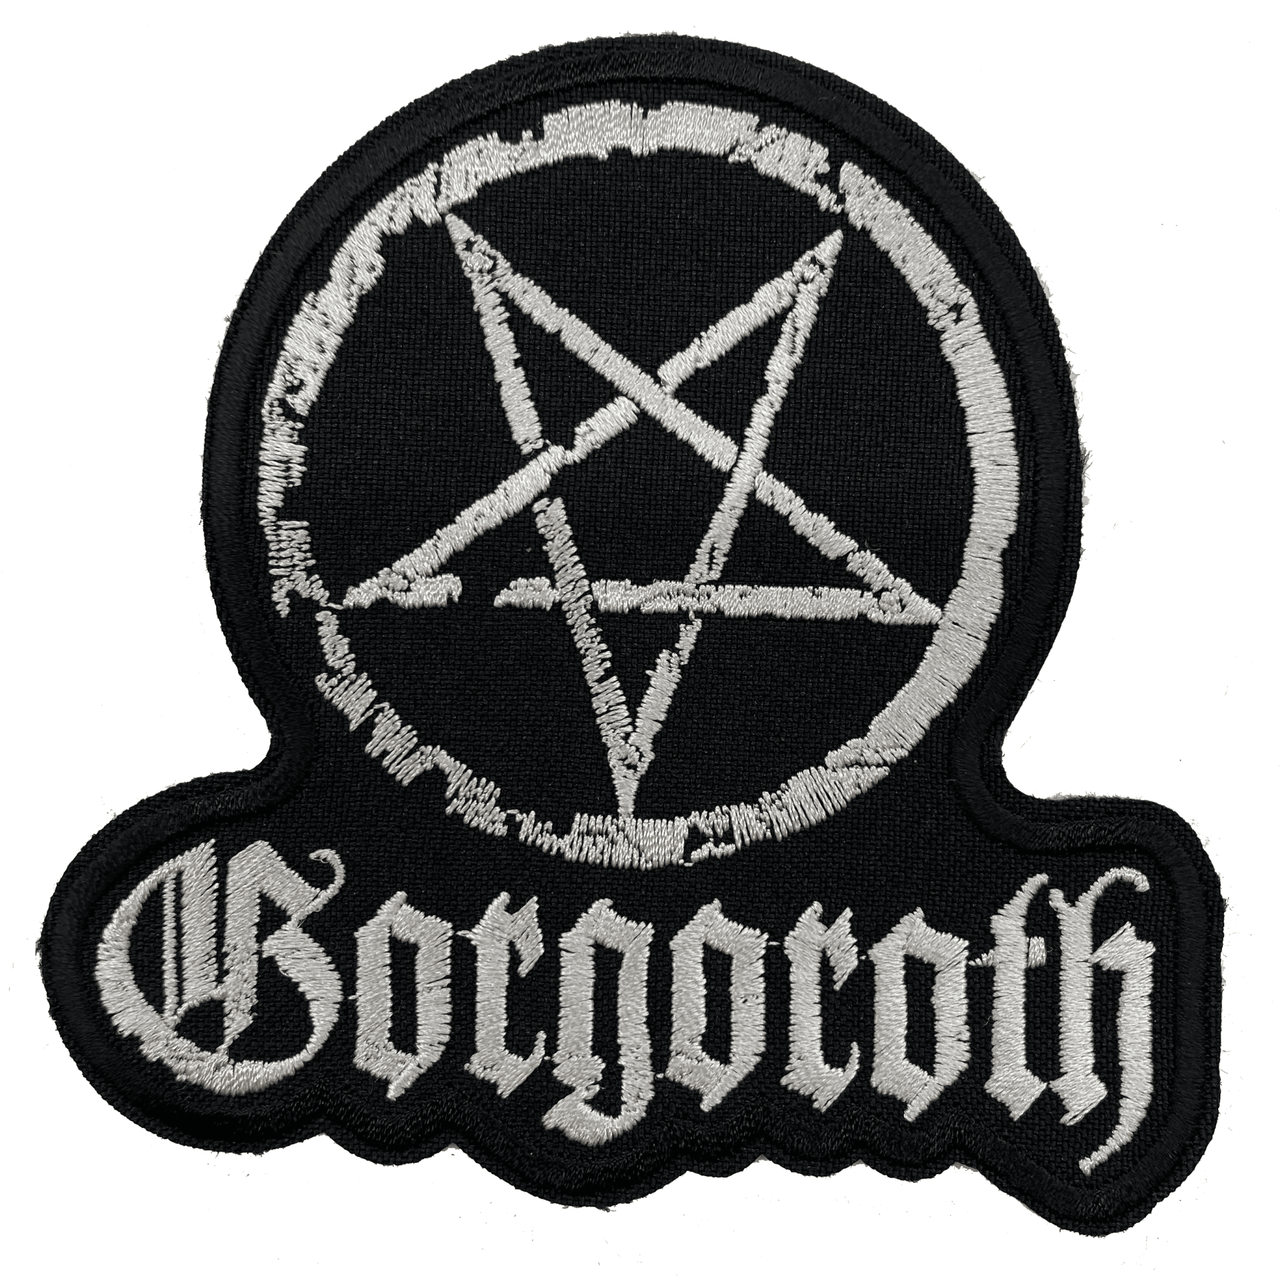 Gorgoroth Pentagram Embroidered Patch